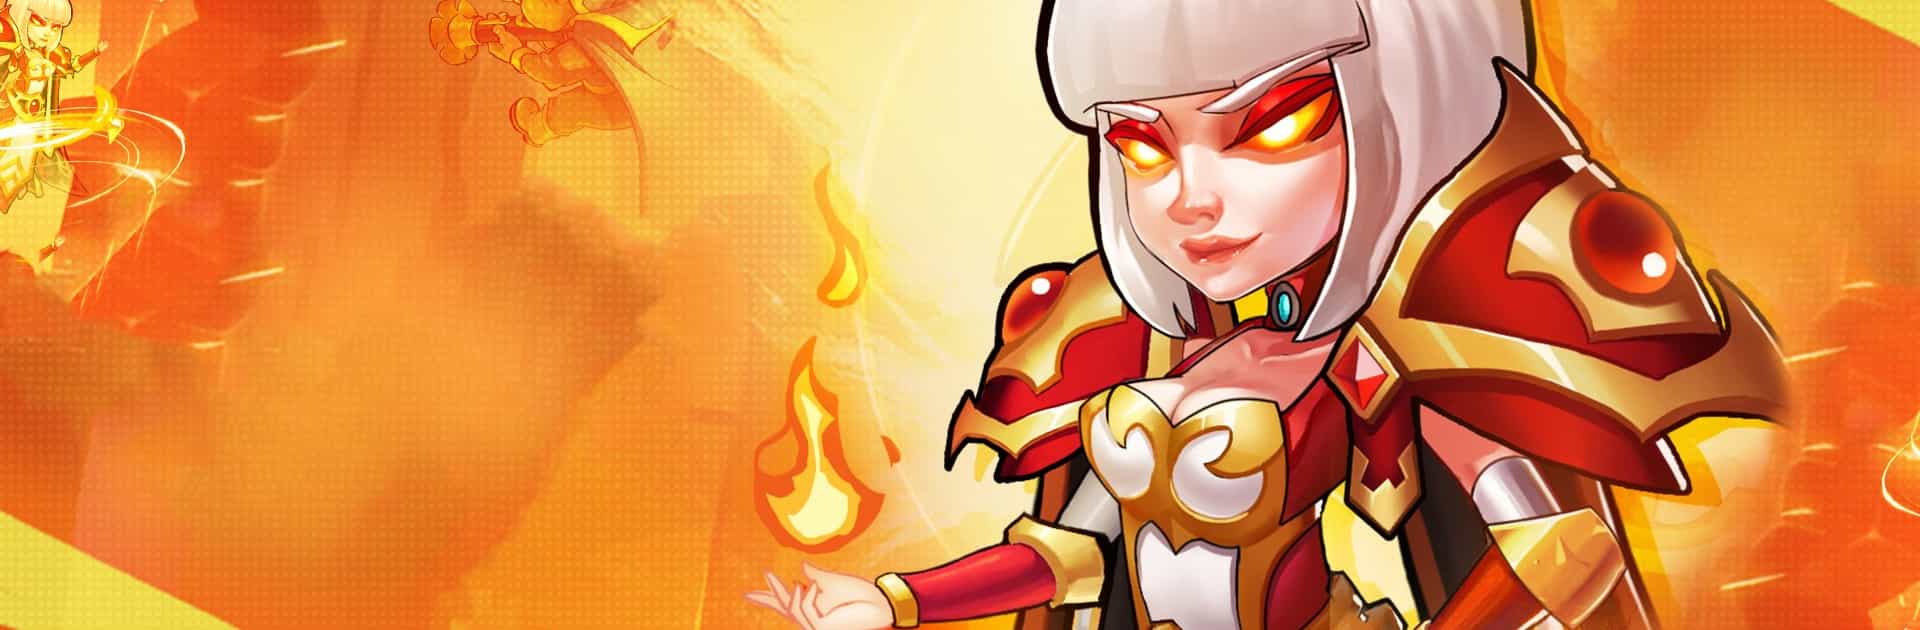 play idle heroes for pc